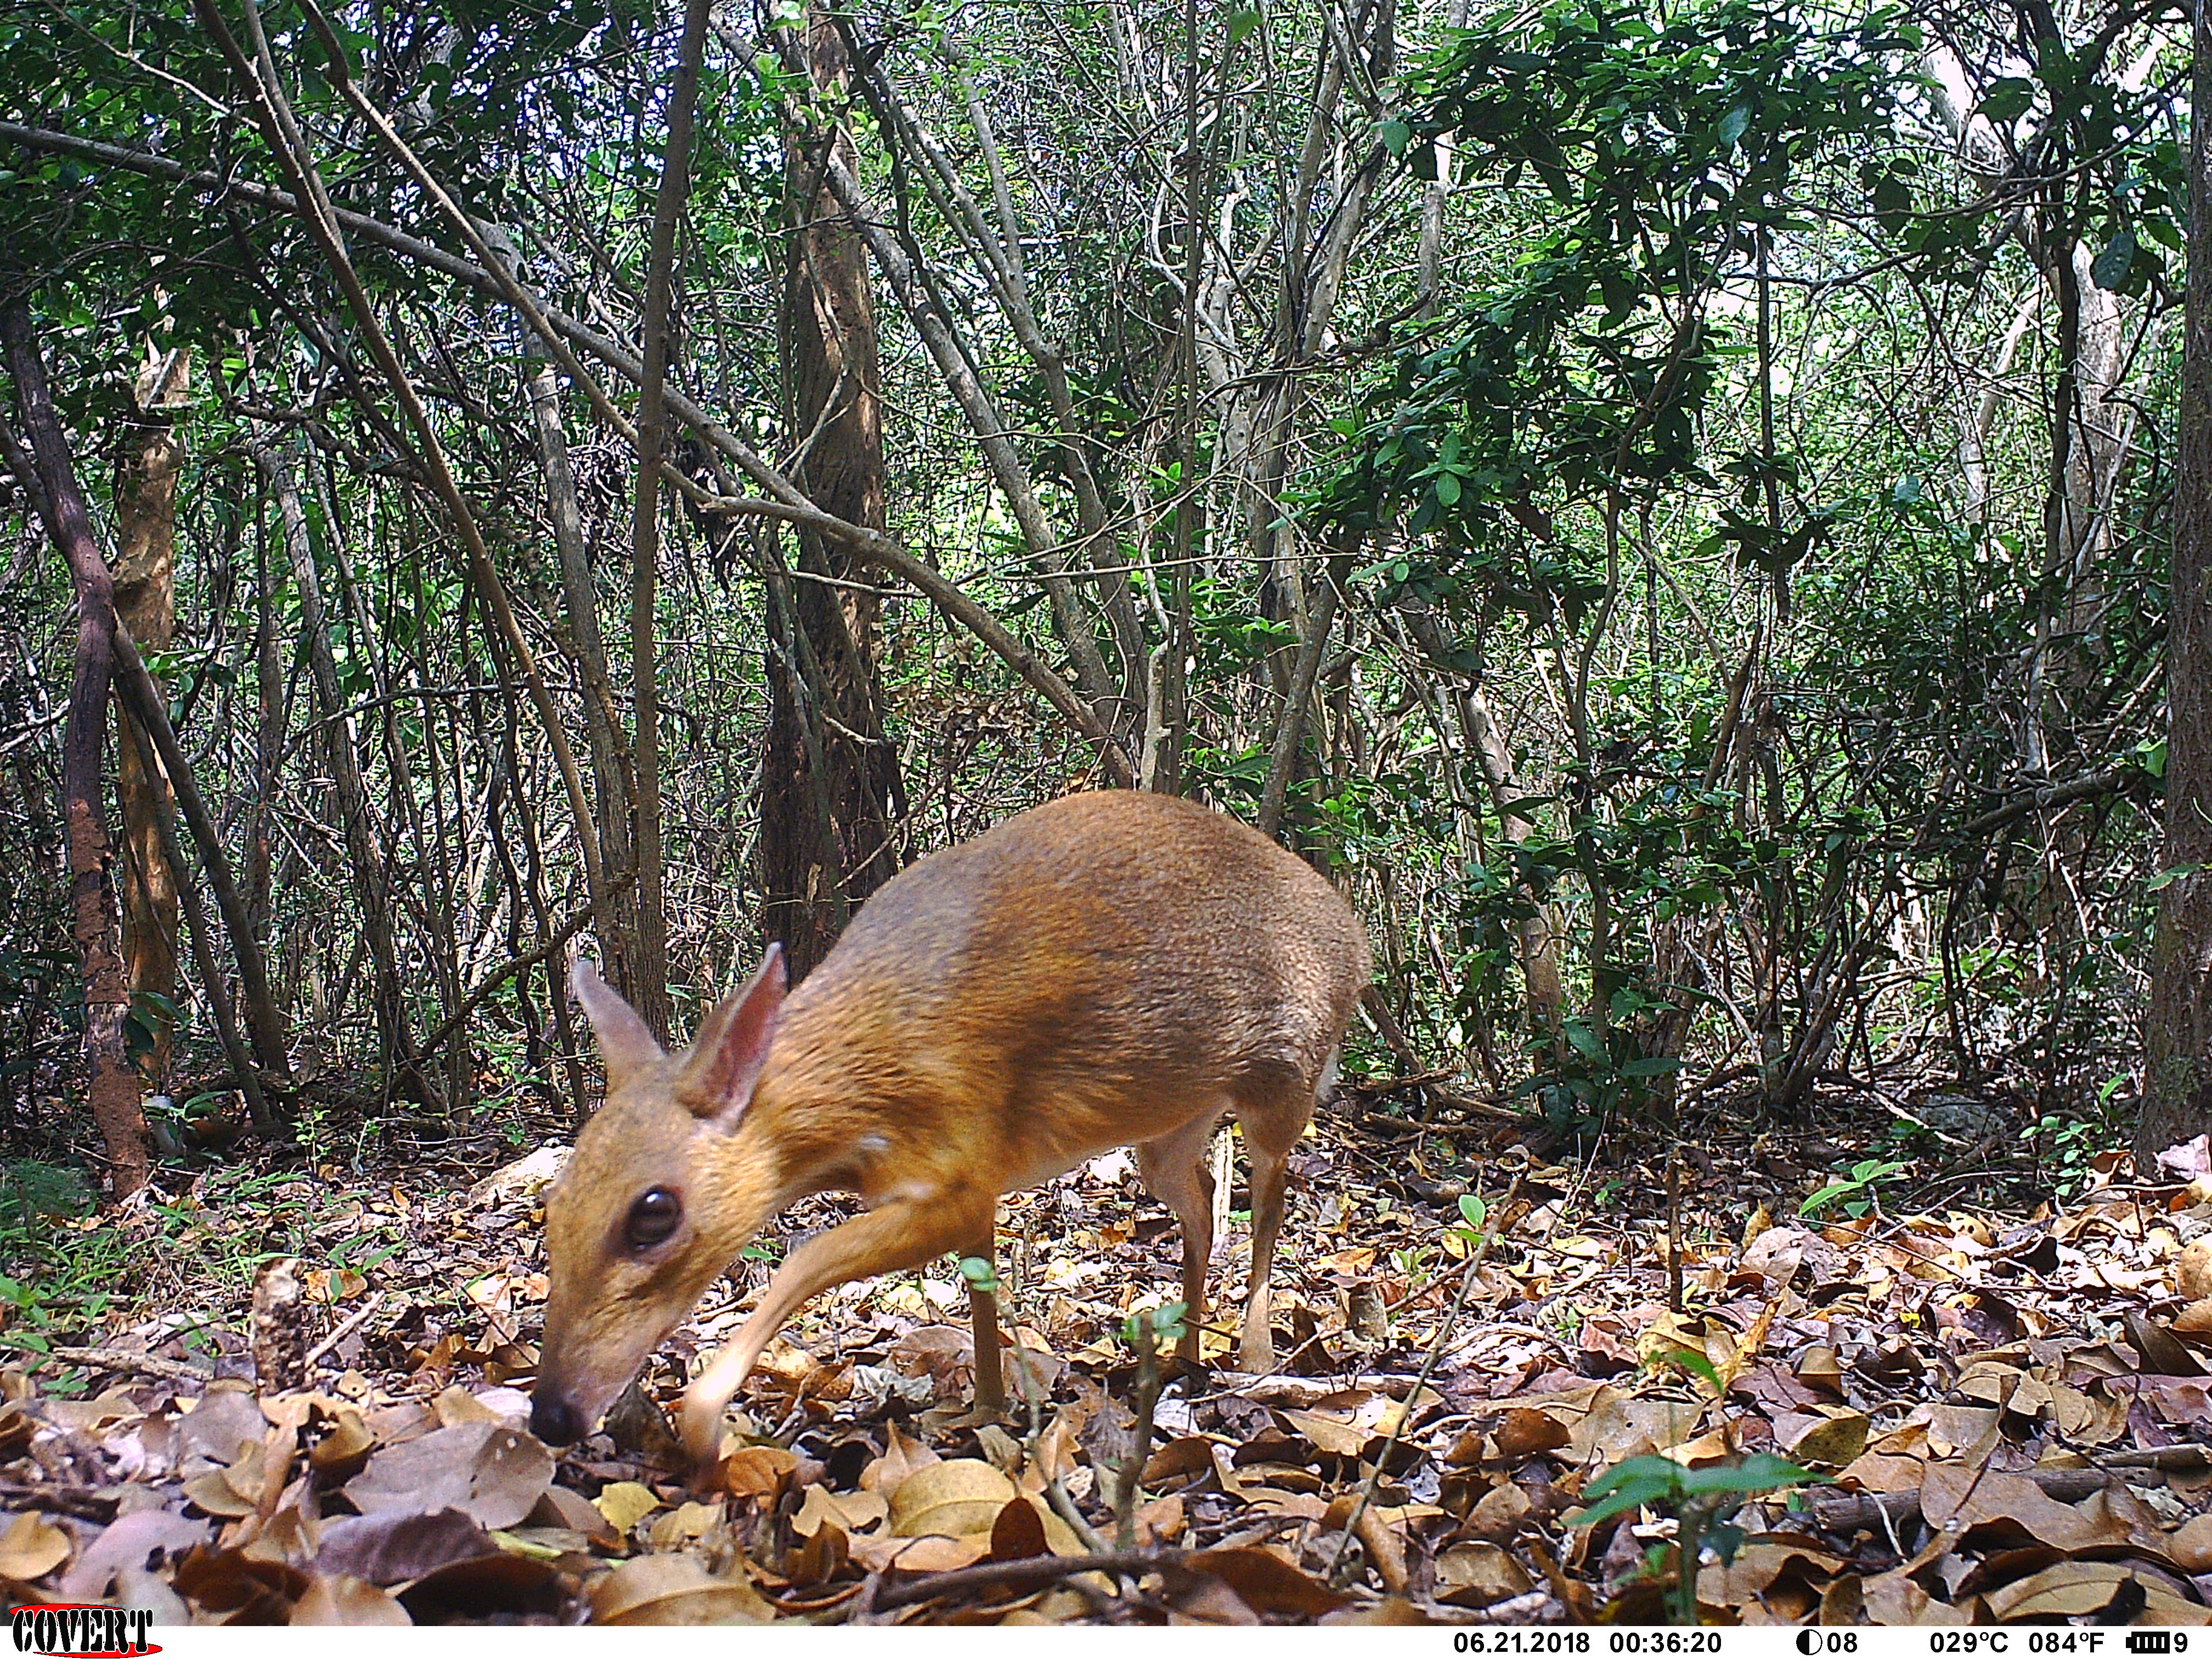 Researchers Just Found the First Mouse-Like Deer in Decades | Time